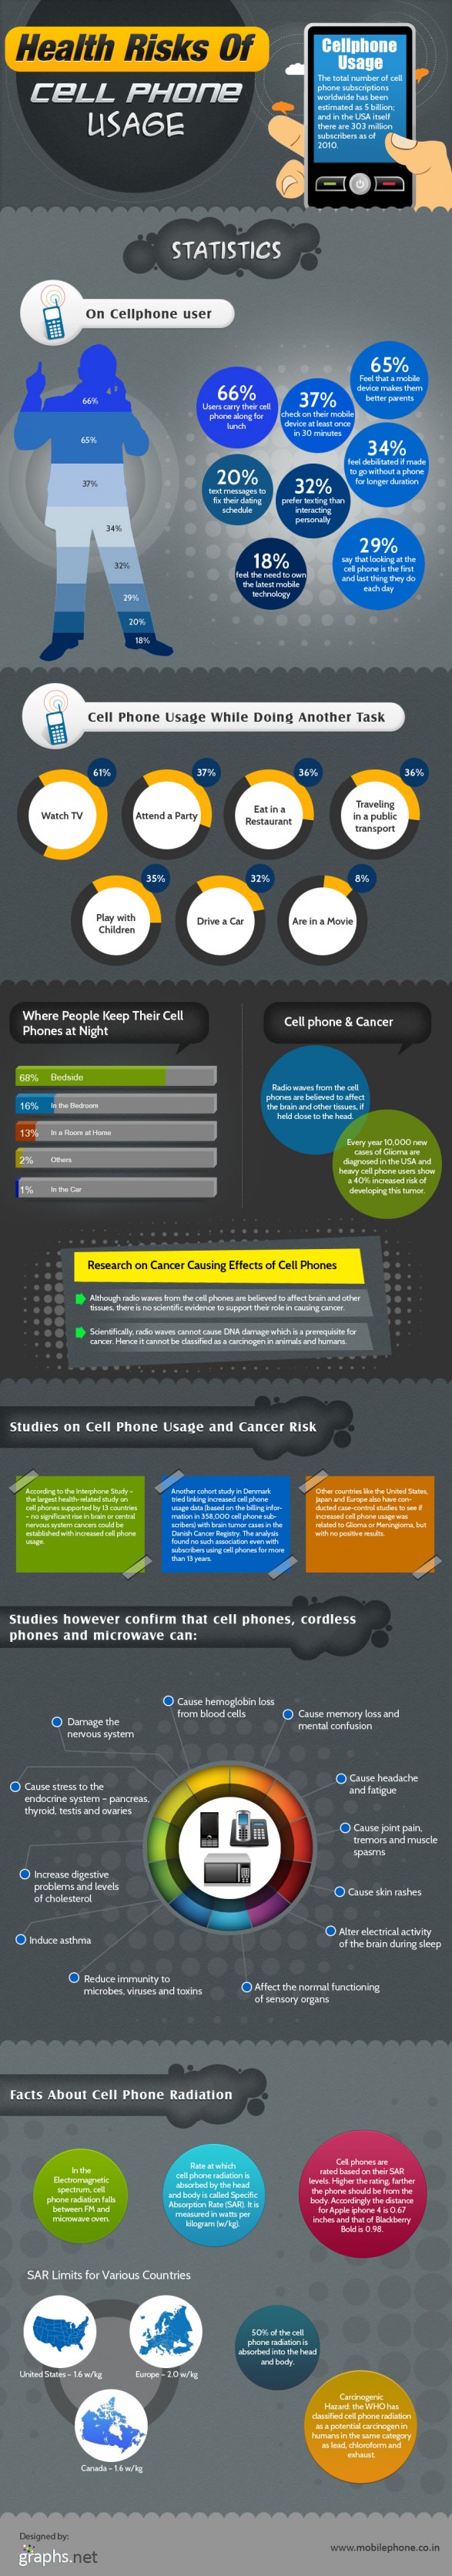 health-risks-of-cell-phone-usage-electromagnetic-infographic